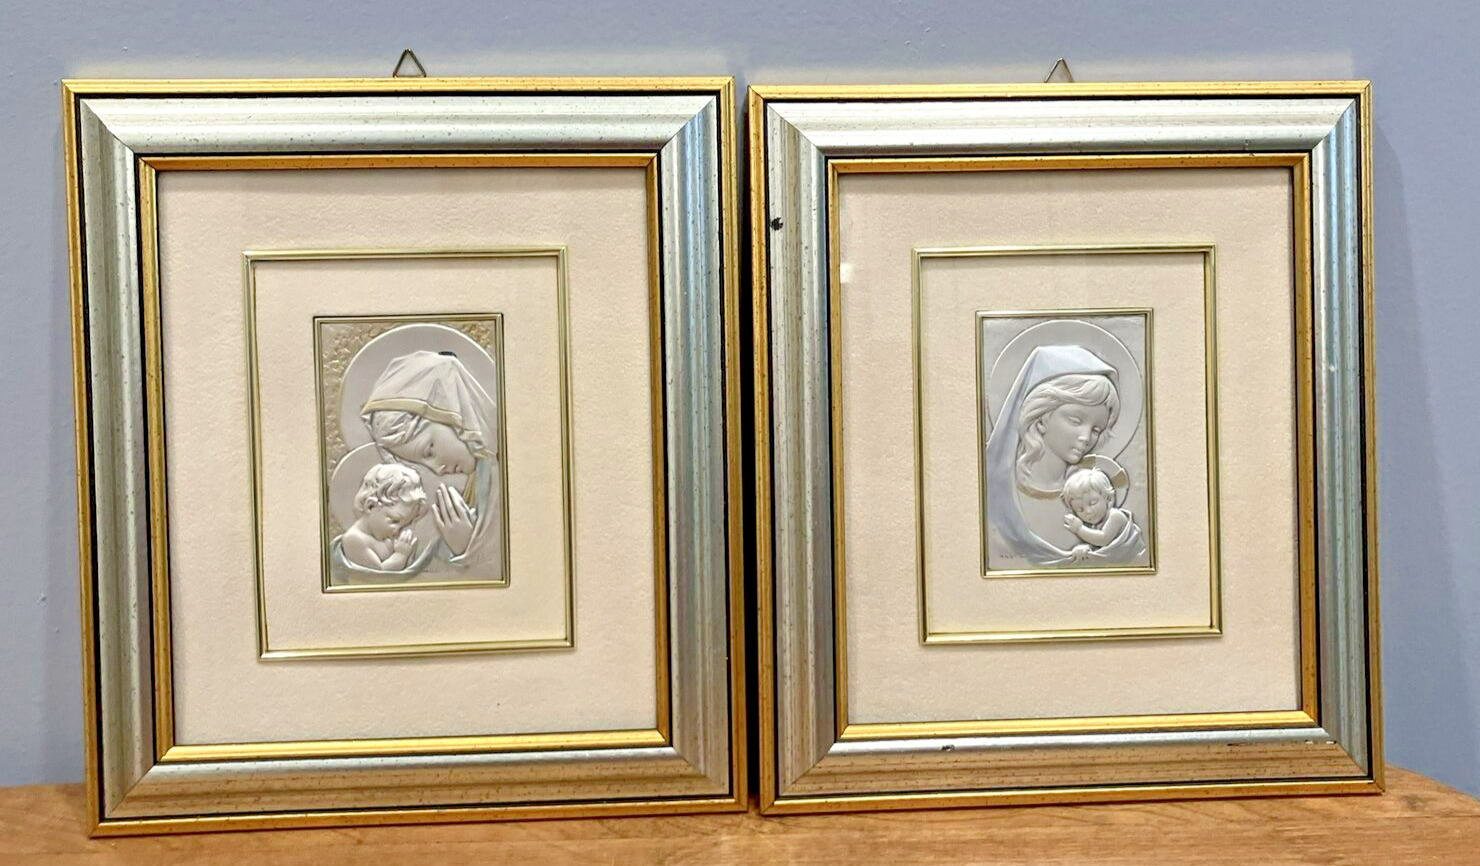 ASA Linea Sterling Silver Madonna & Child Mary & Jesus Framed Matted